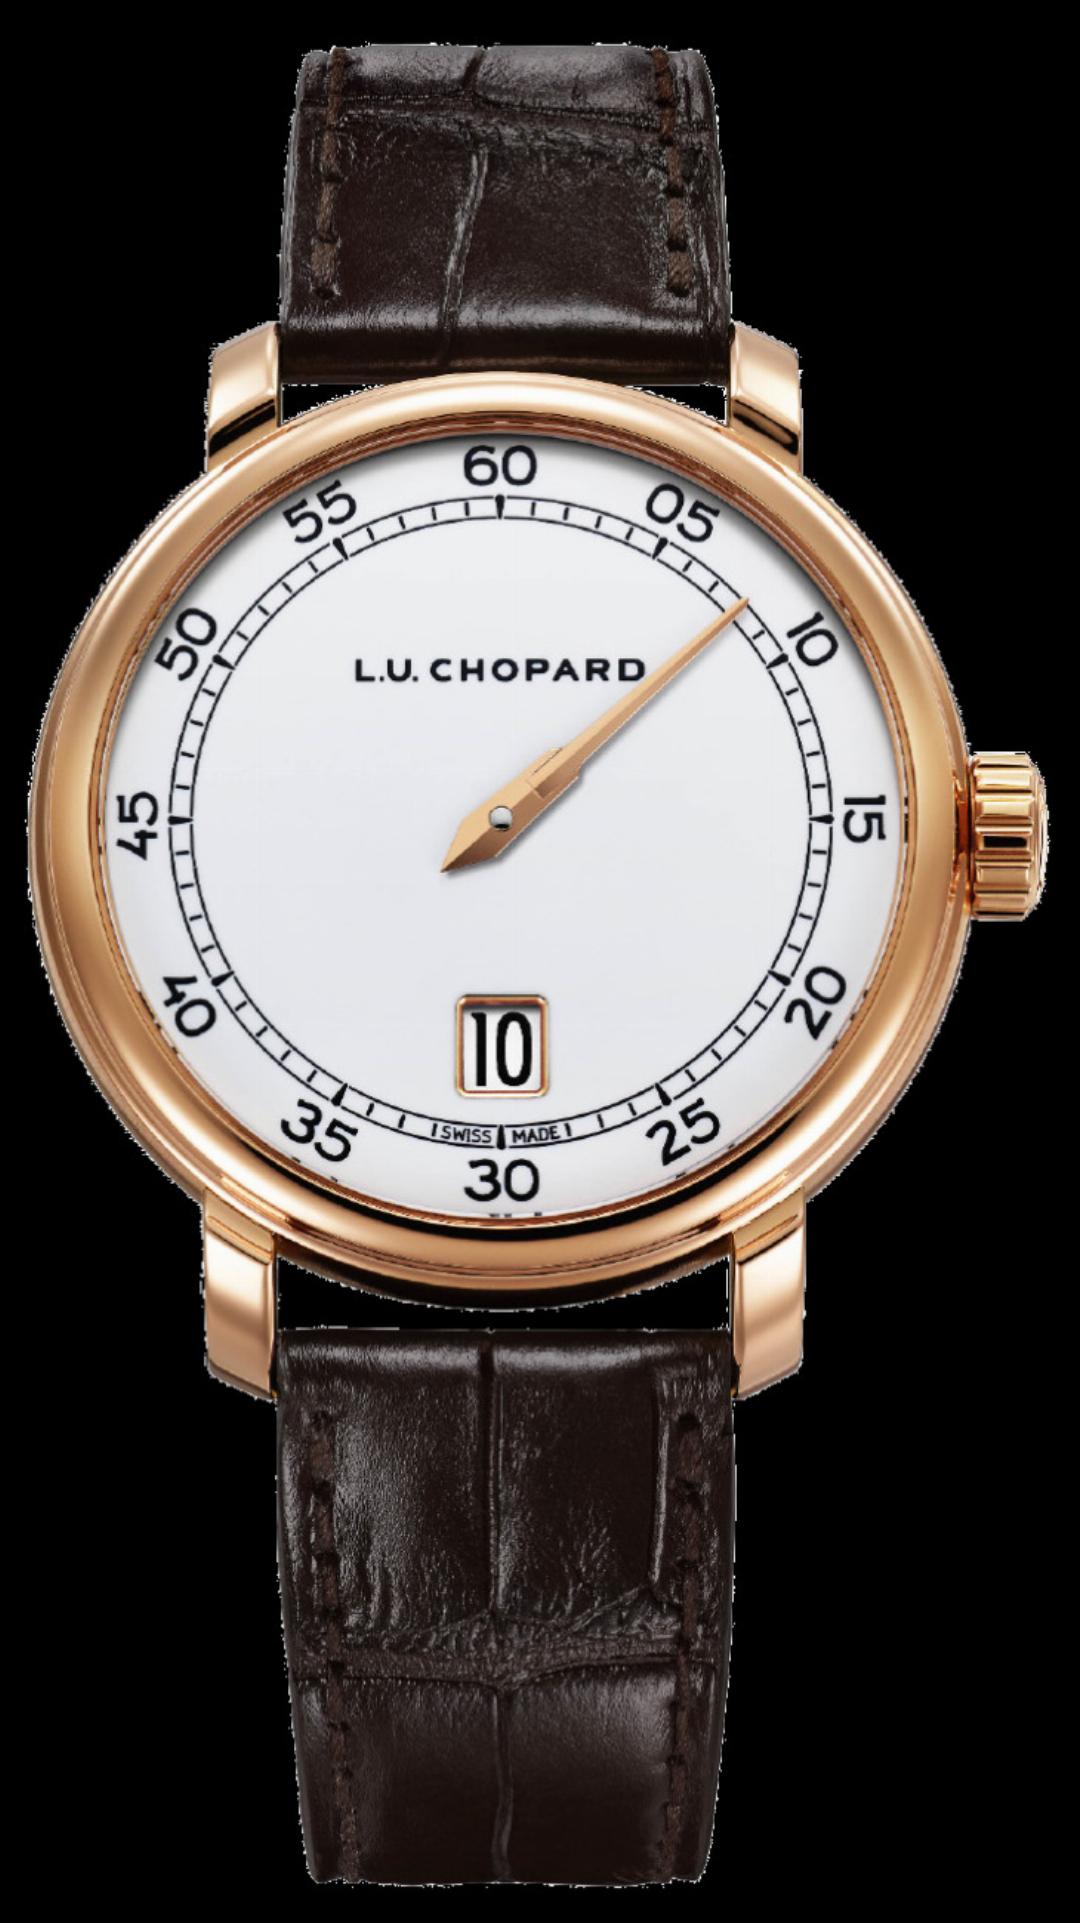 L.U.C Quattro Spirit 25 Limited & numbered edition of 100 in ethical 18-carat rose gold, Diameter 40.00 mm, Thickness 10.30 mm, Water resistance 30 meters ,Price CHF 46 800